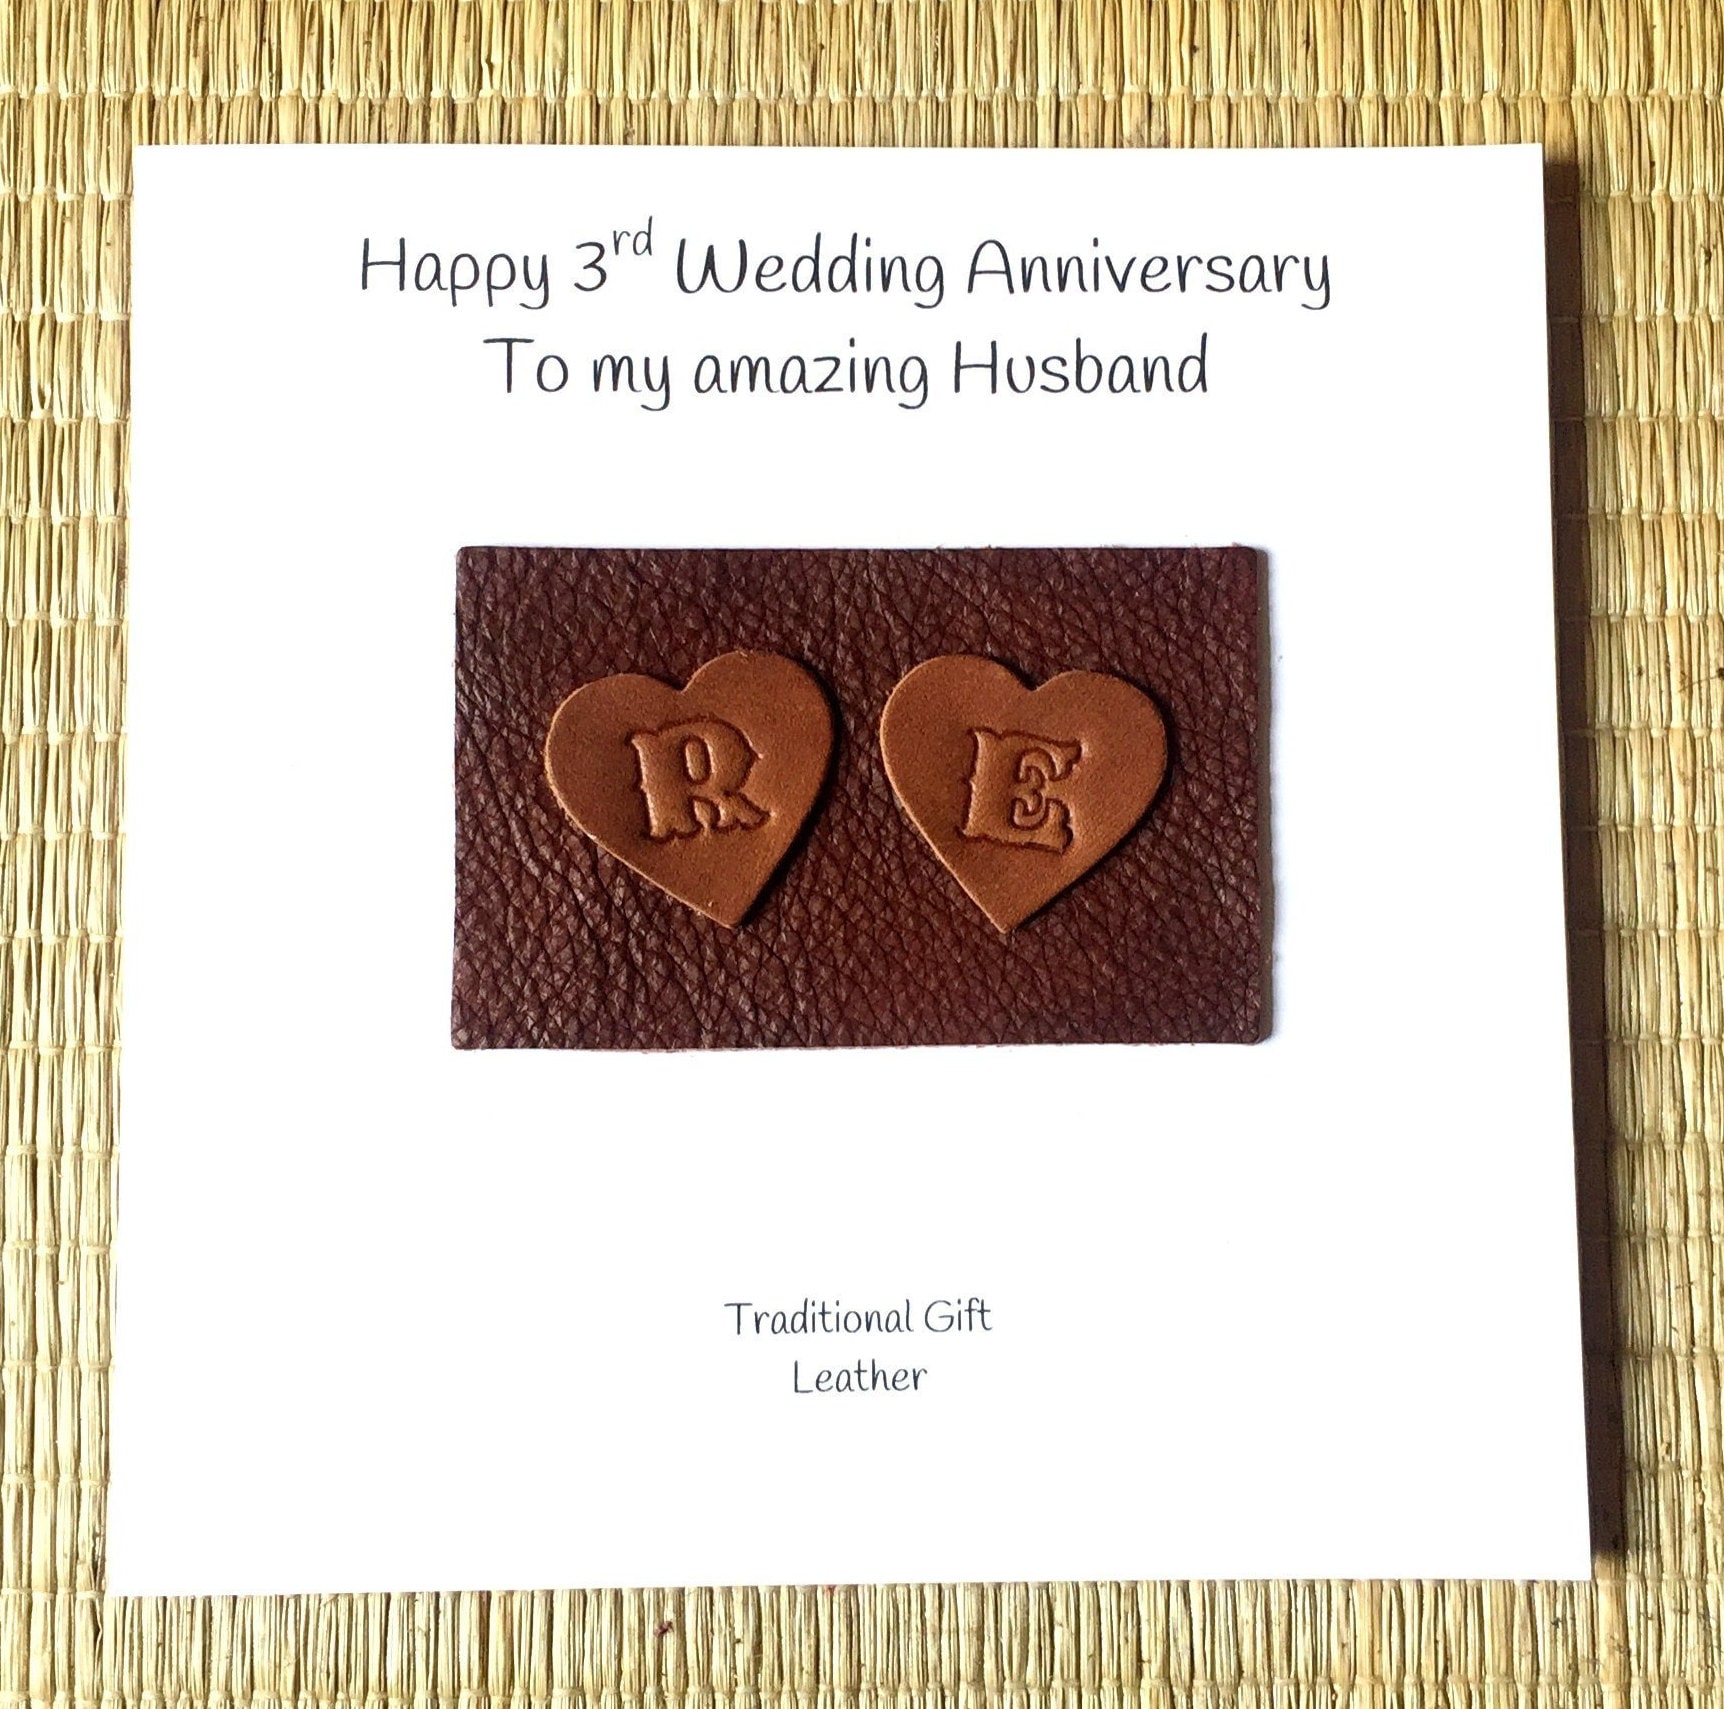 Sentimental Verse I Love You My Wife 3rd Wedding Anniversary Card On Our Leather Anniversary 3 Years 